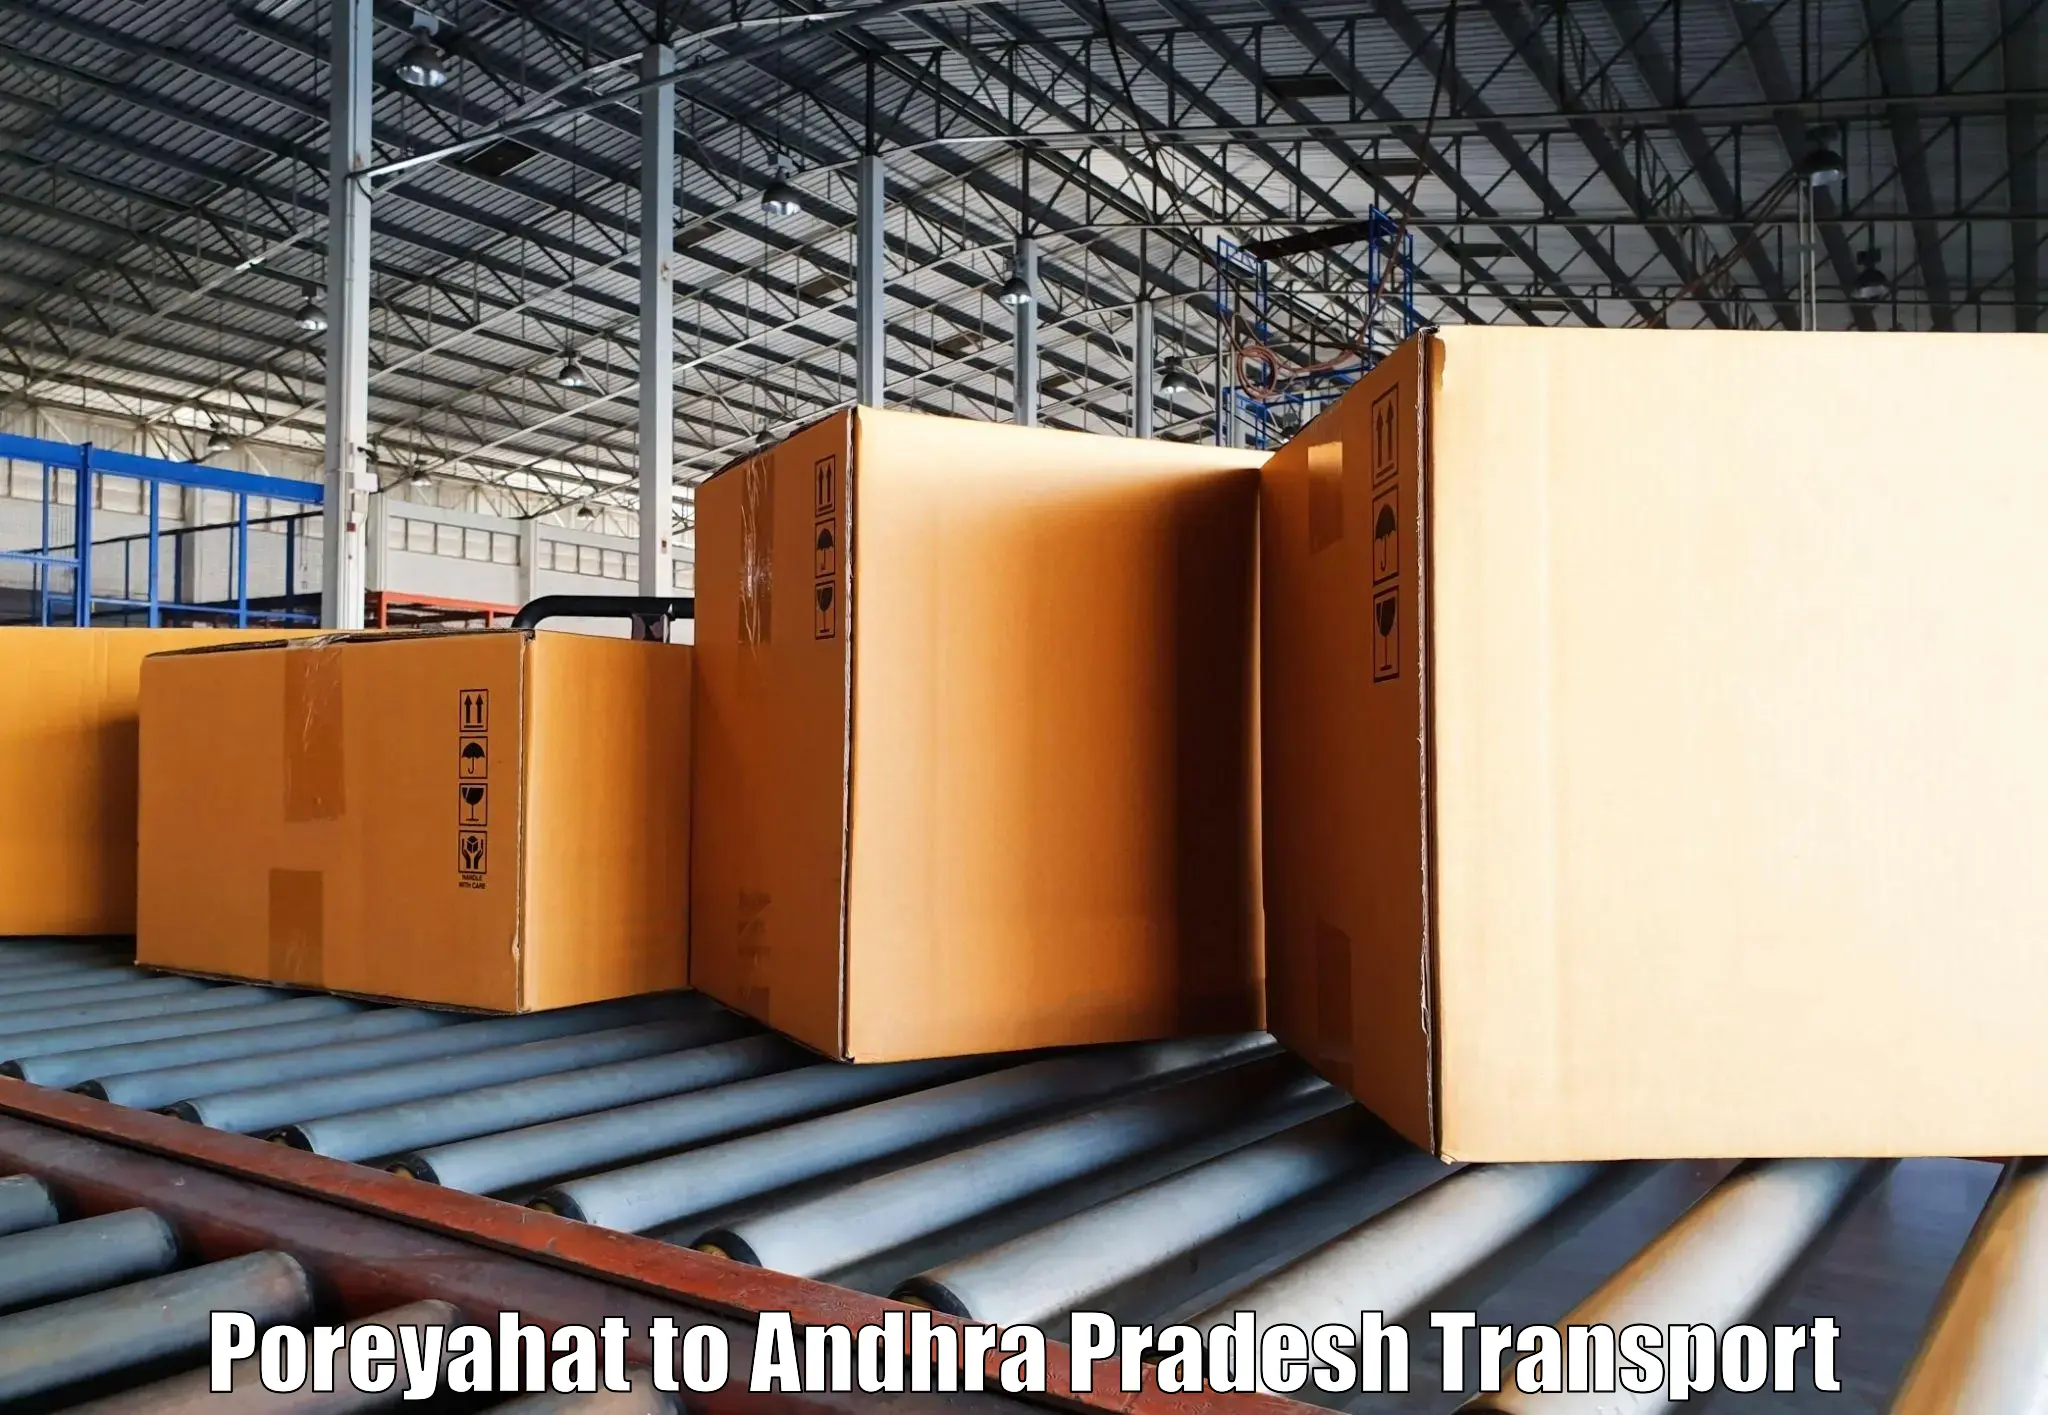 Vehicle transport services Poreyahat to Anantapur